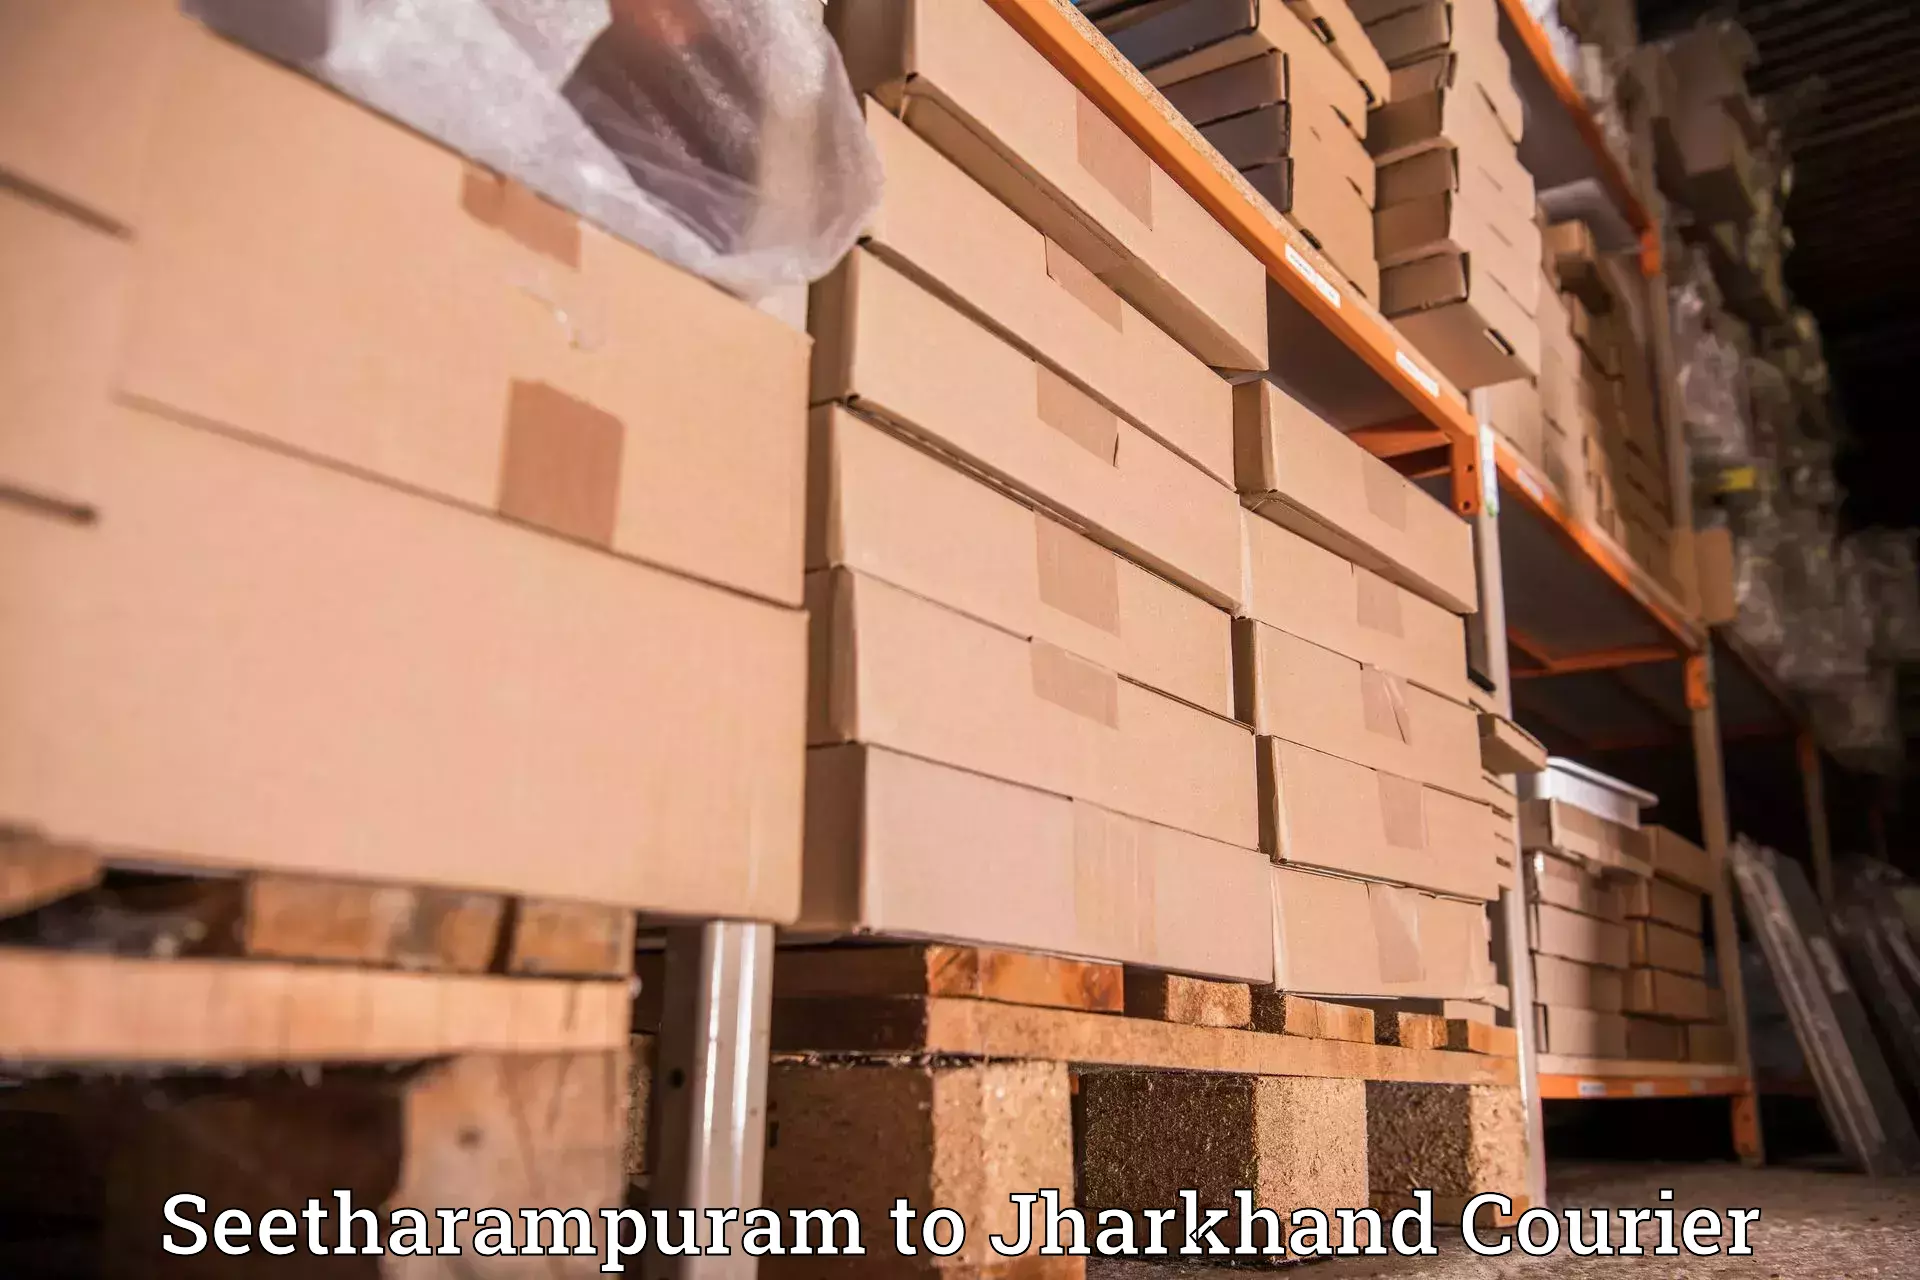 State-of-the-art courier technology Seetharampuram to Ranchi